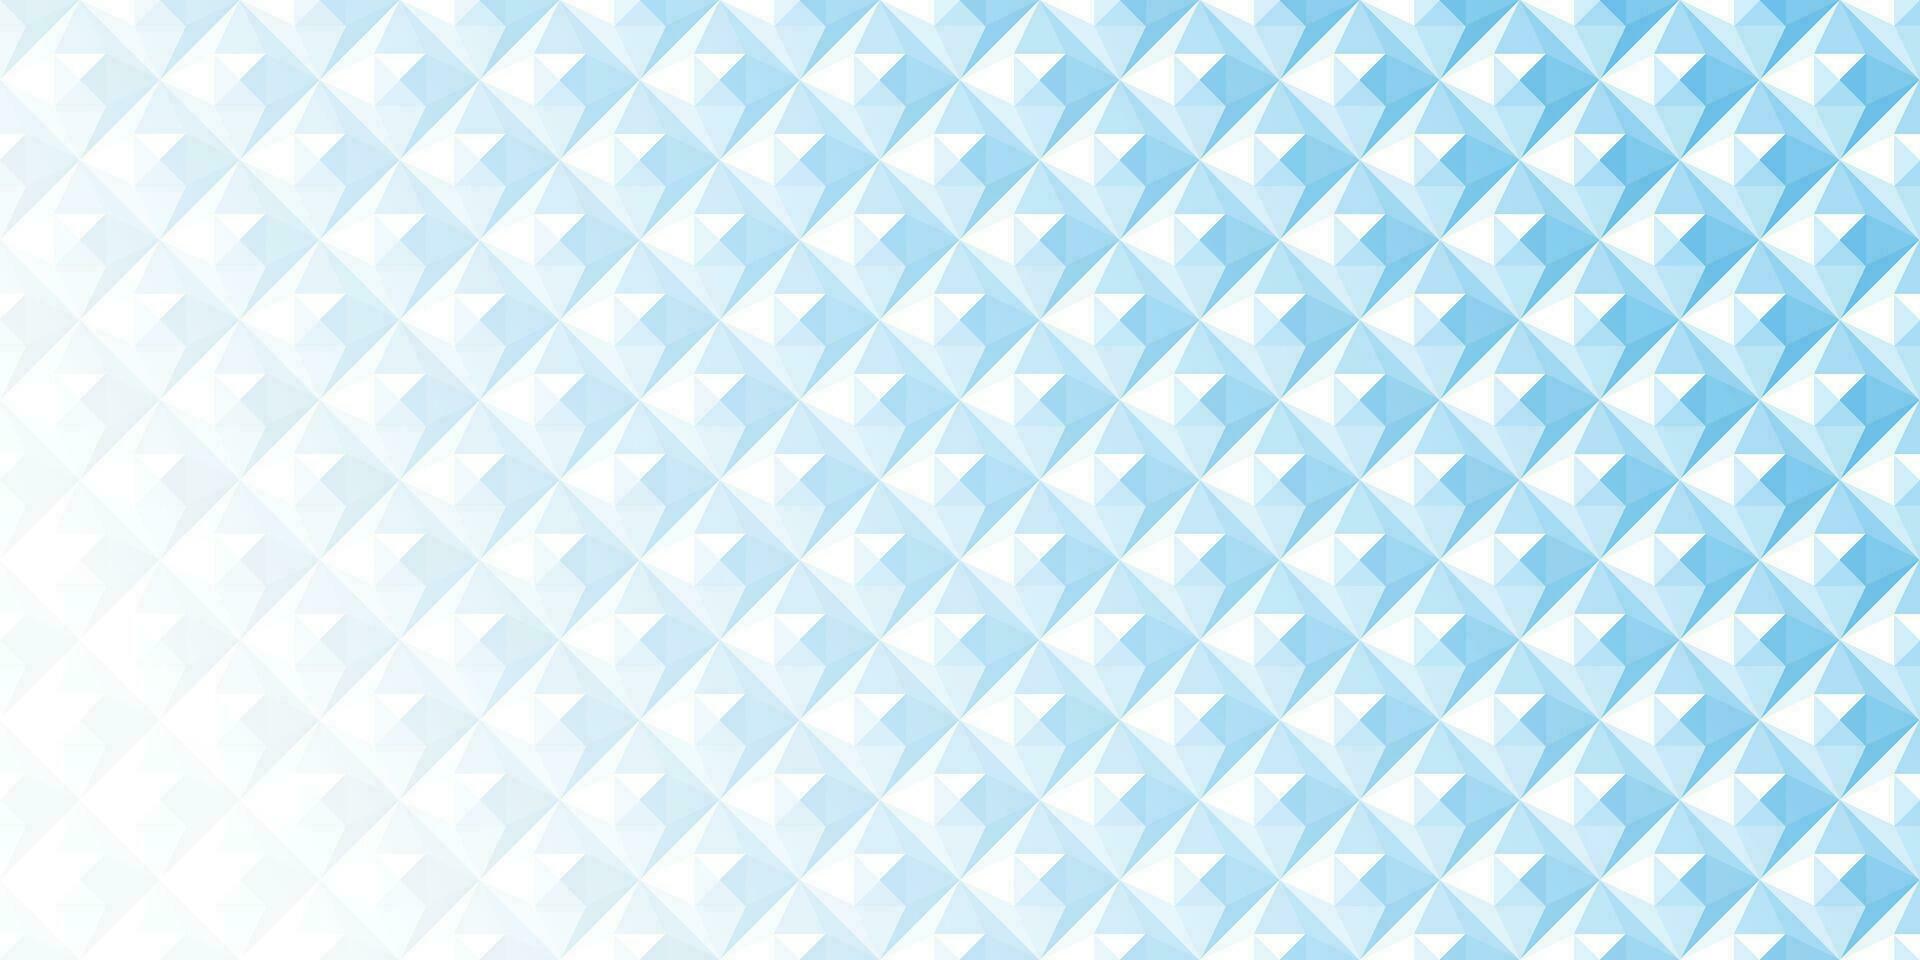 Abstract white and blue geometric background texture vector